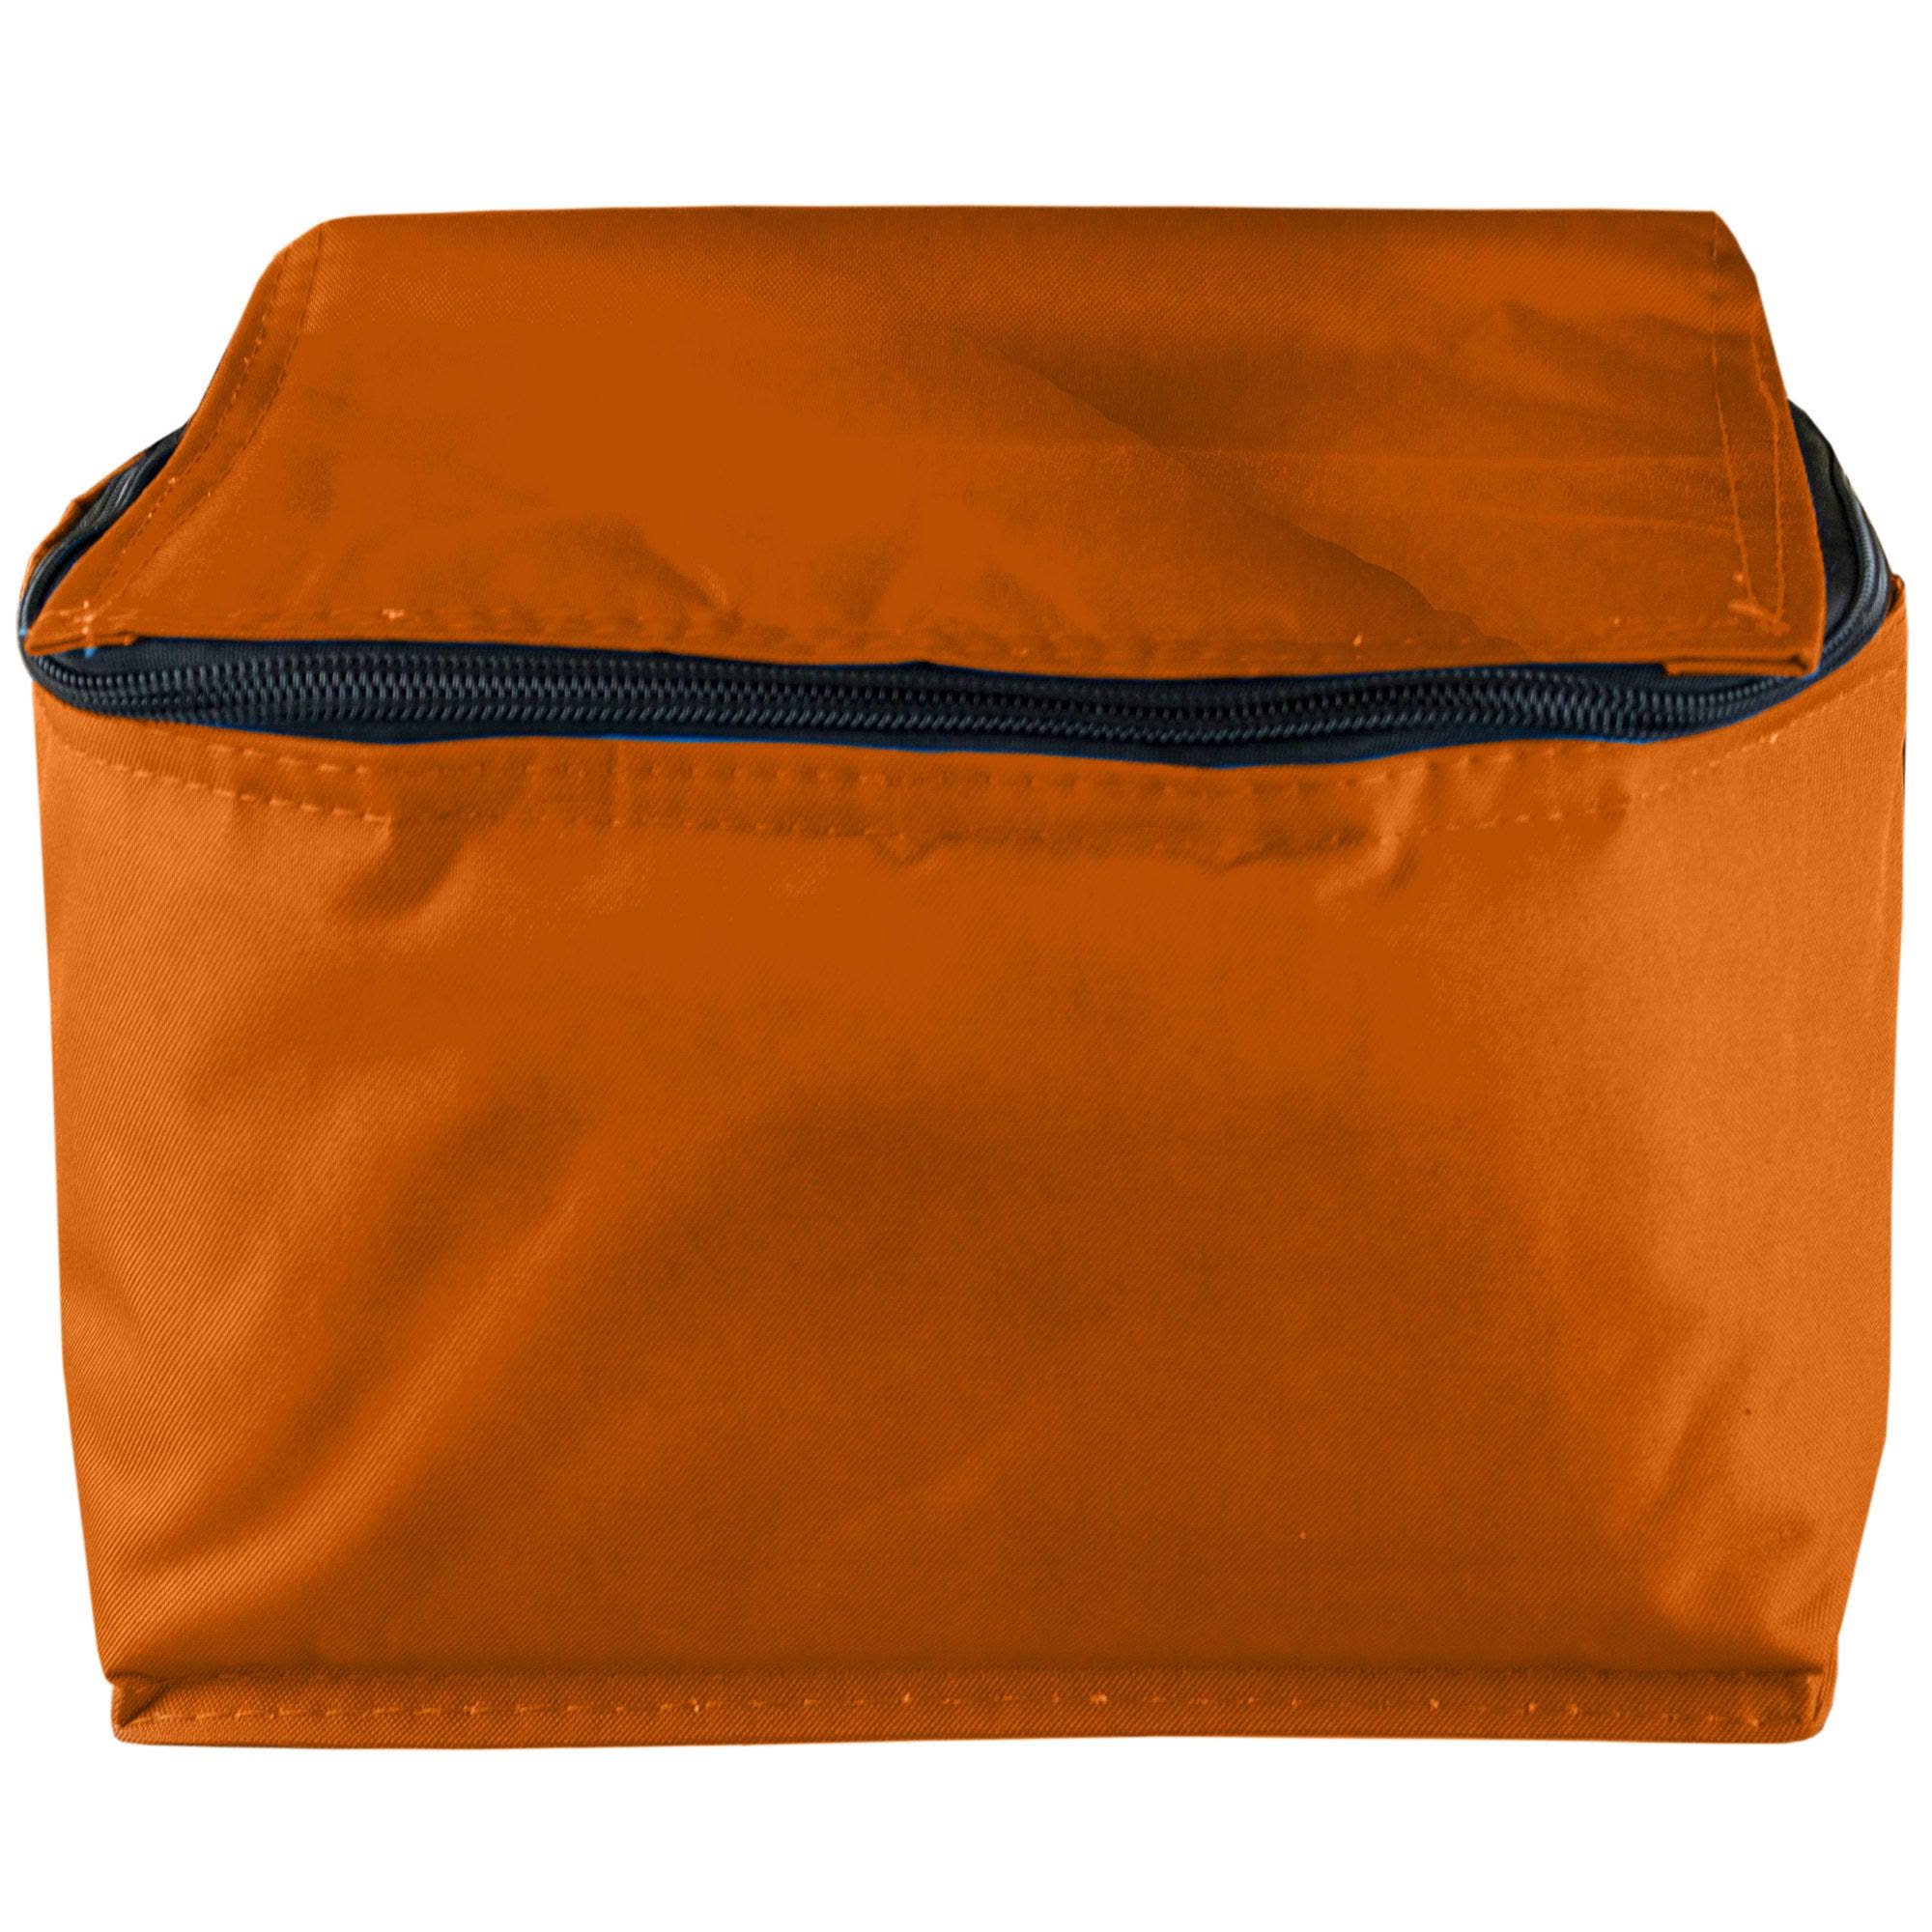 EasyLunchboxes Lunch Tote and Beverage Cooler, Orange | Food Service Equipment & Supplies